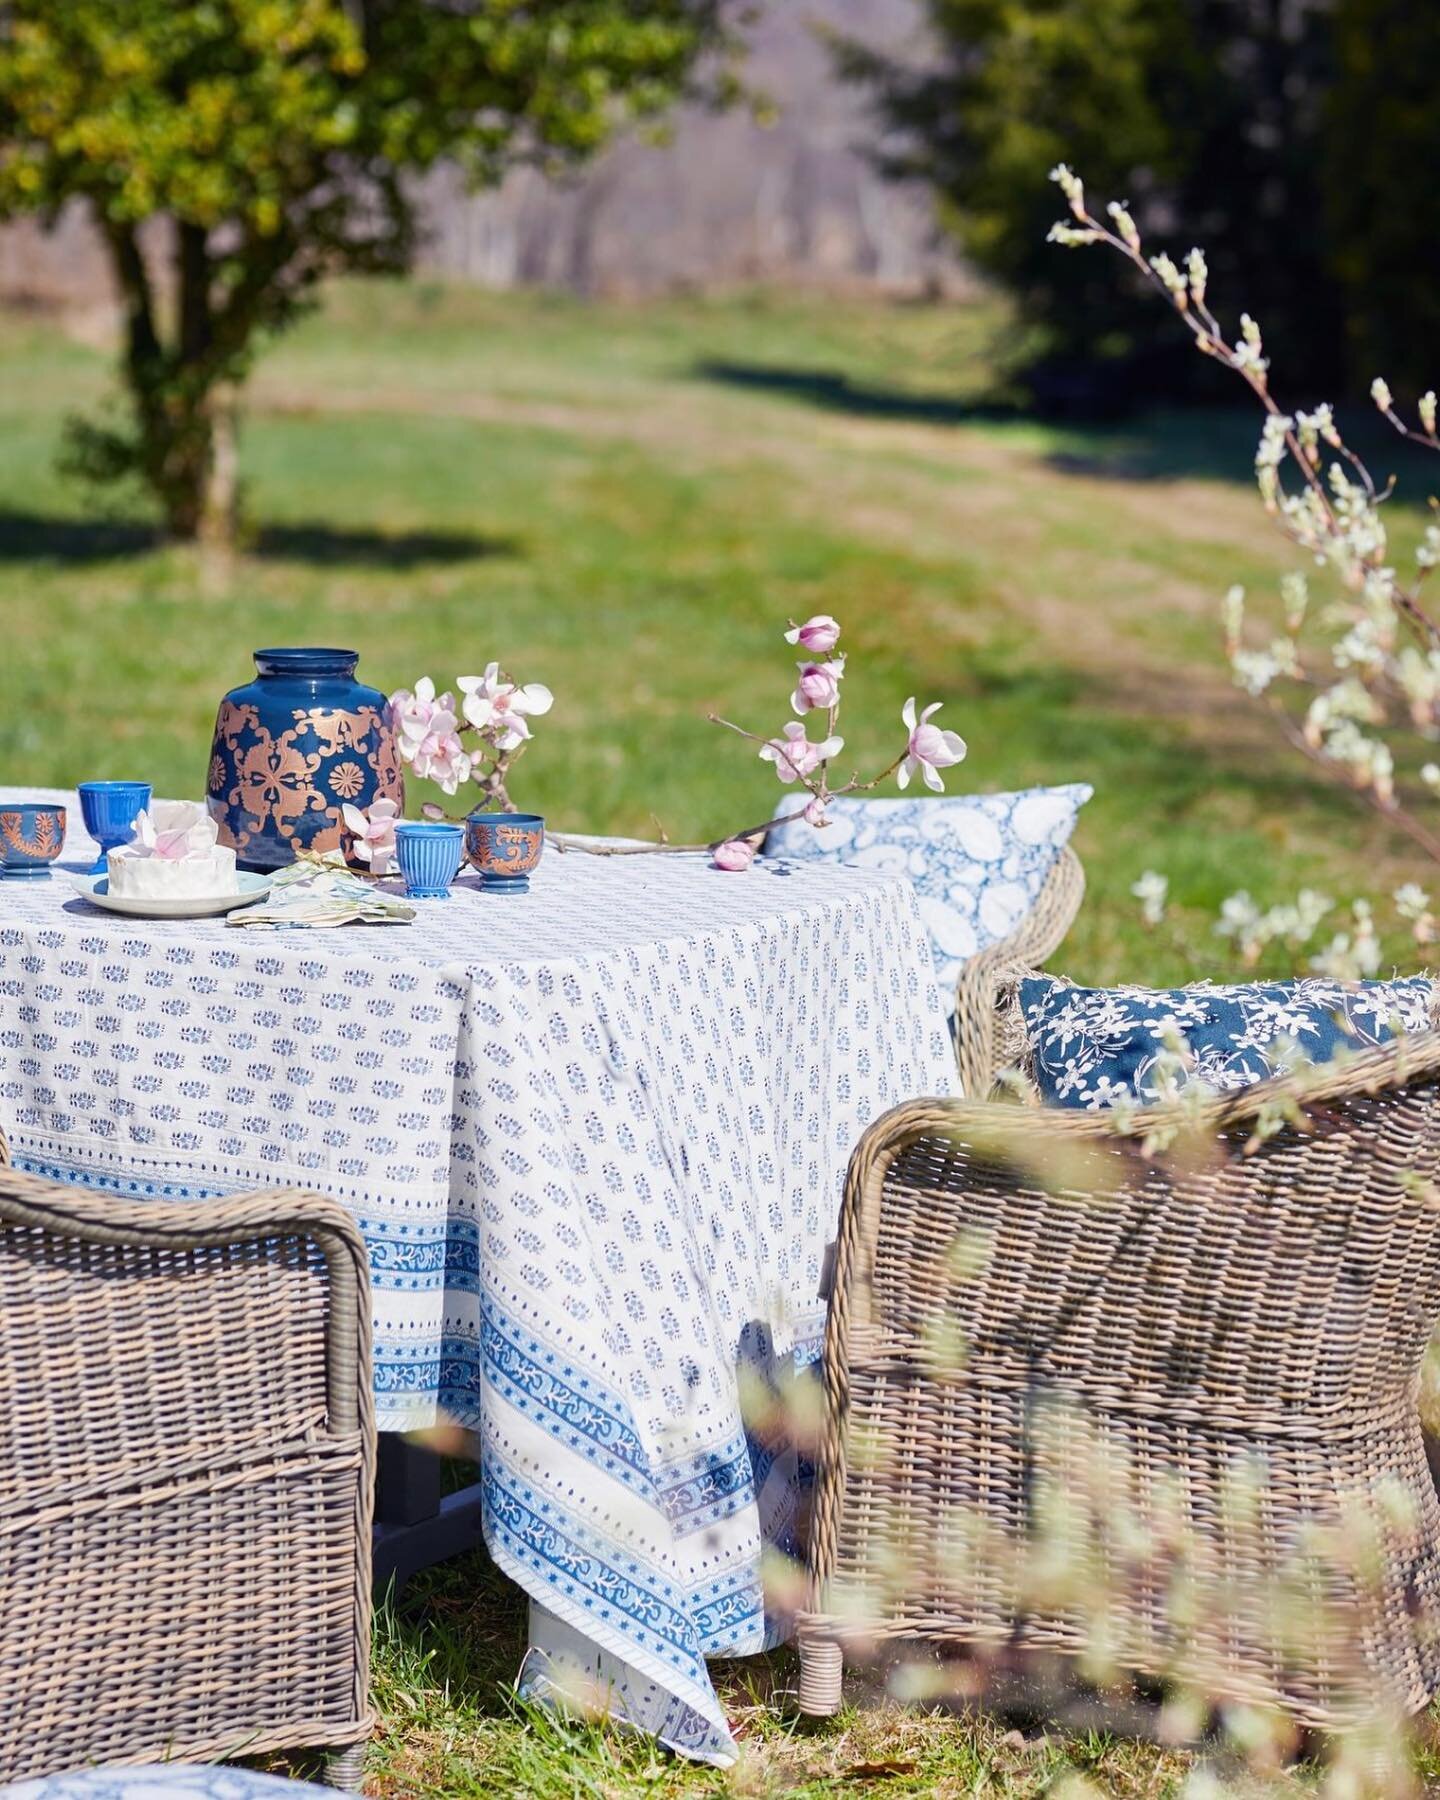 A classic combination of navy and white. Shop in-store to bring this table sophistication to your home. #outdoorstyle

#wicker #wickerfurniture #tablestyle #tabledecor #summertime #dundeegardens #shopsmall #smallbusiness #shopnepa